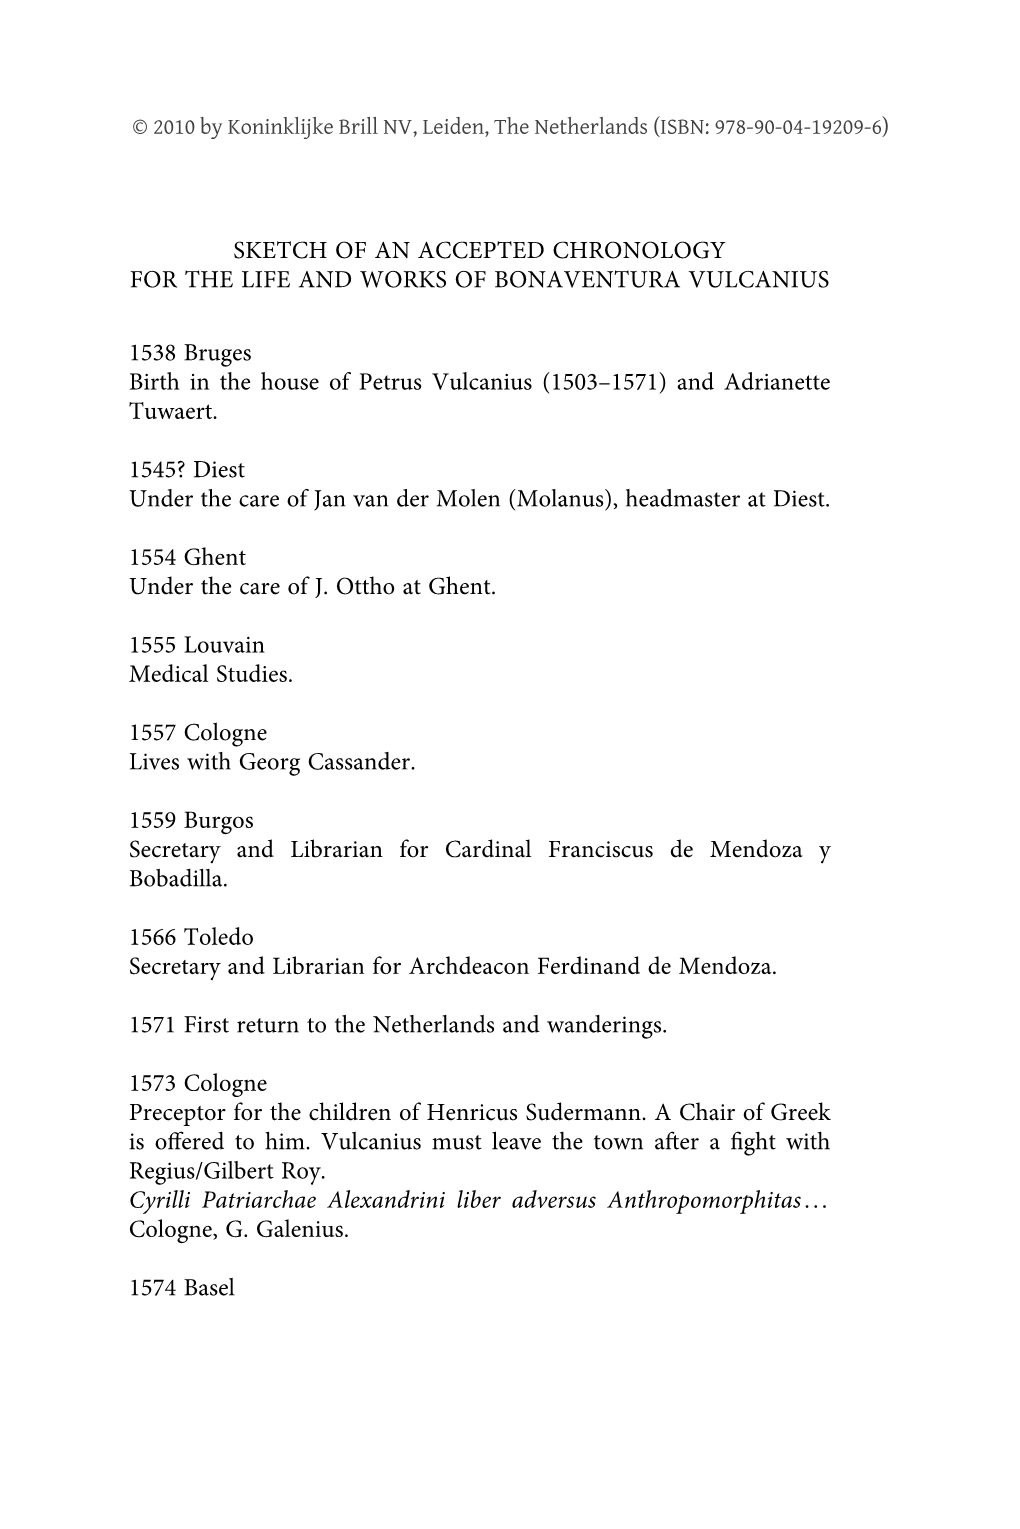 Sketch of an Accepted Chronology for the Life and Works of Bonaventura Vulcanius